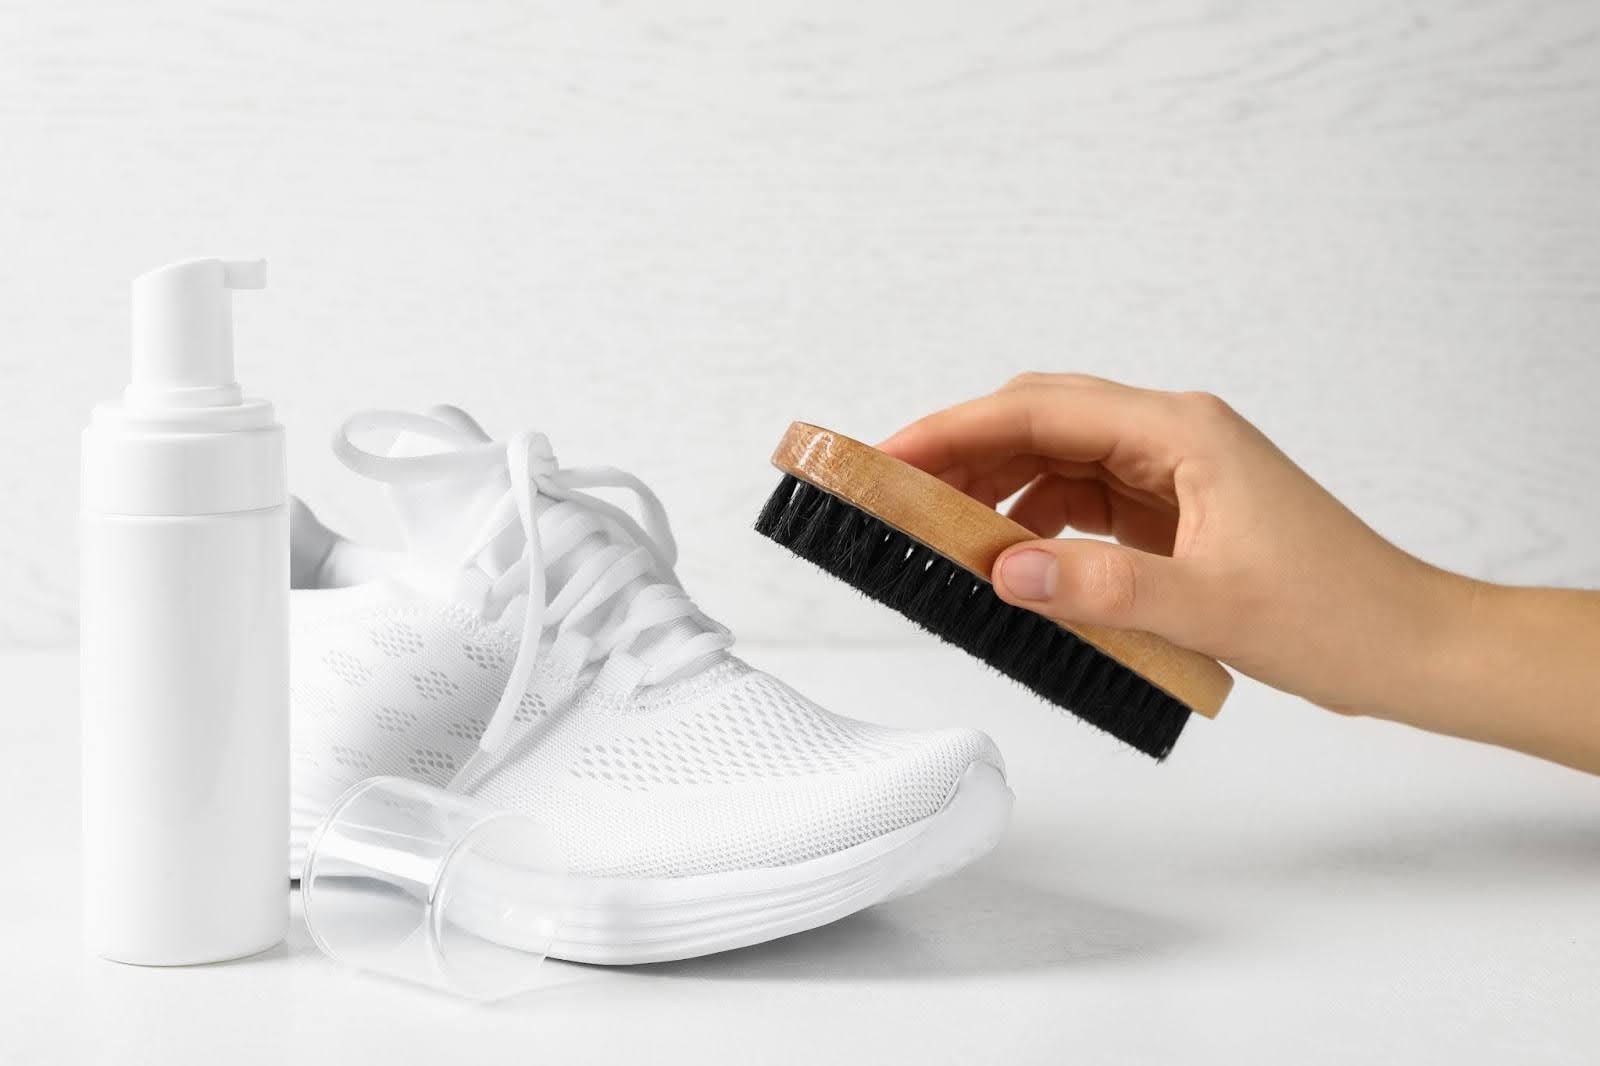 Hand showing how to whiten shoes with brush and cleaner.